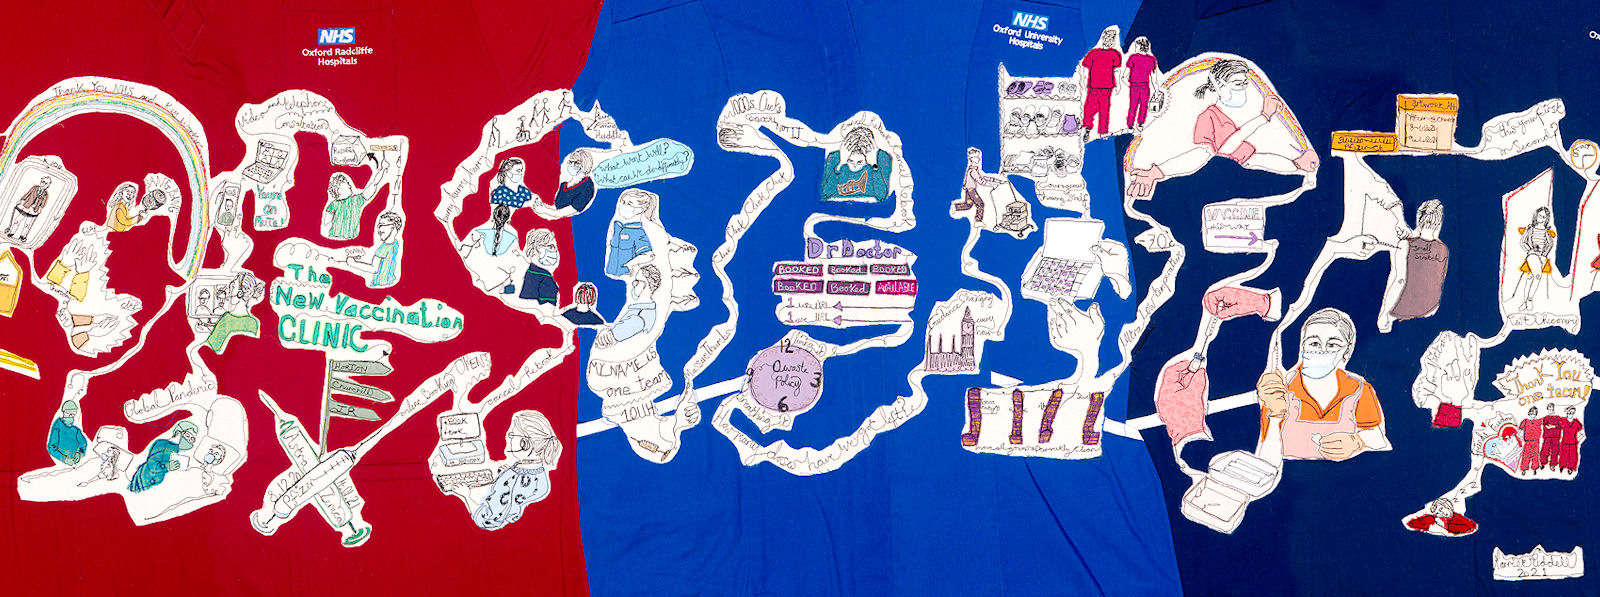 Naive images of vaccination clinics embroidered onto NHS staff uniforms.